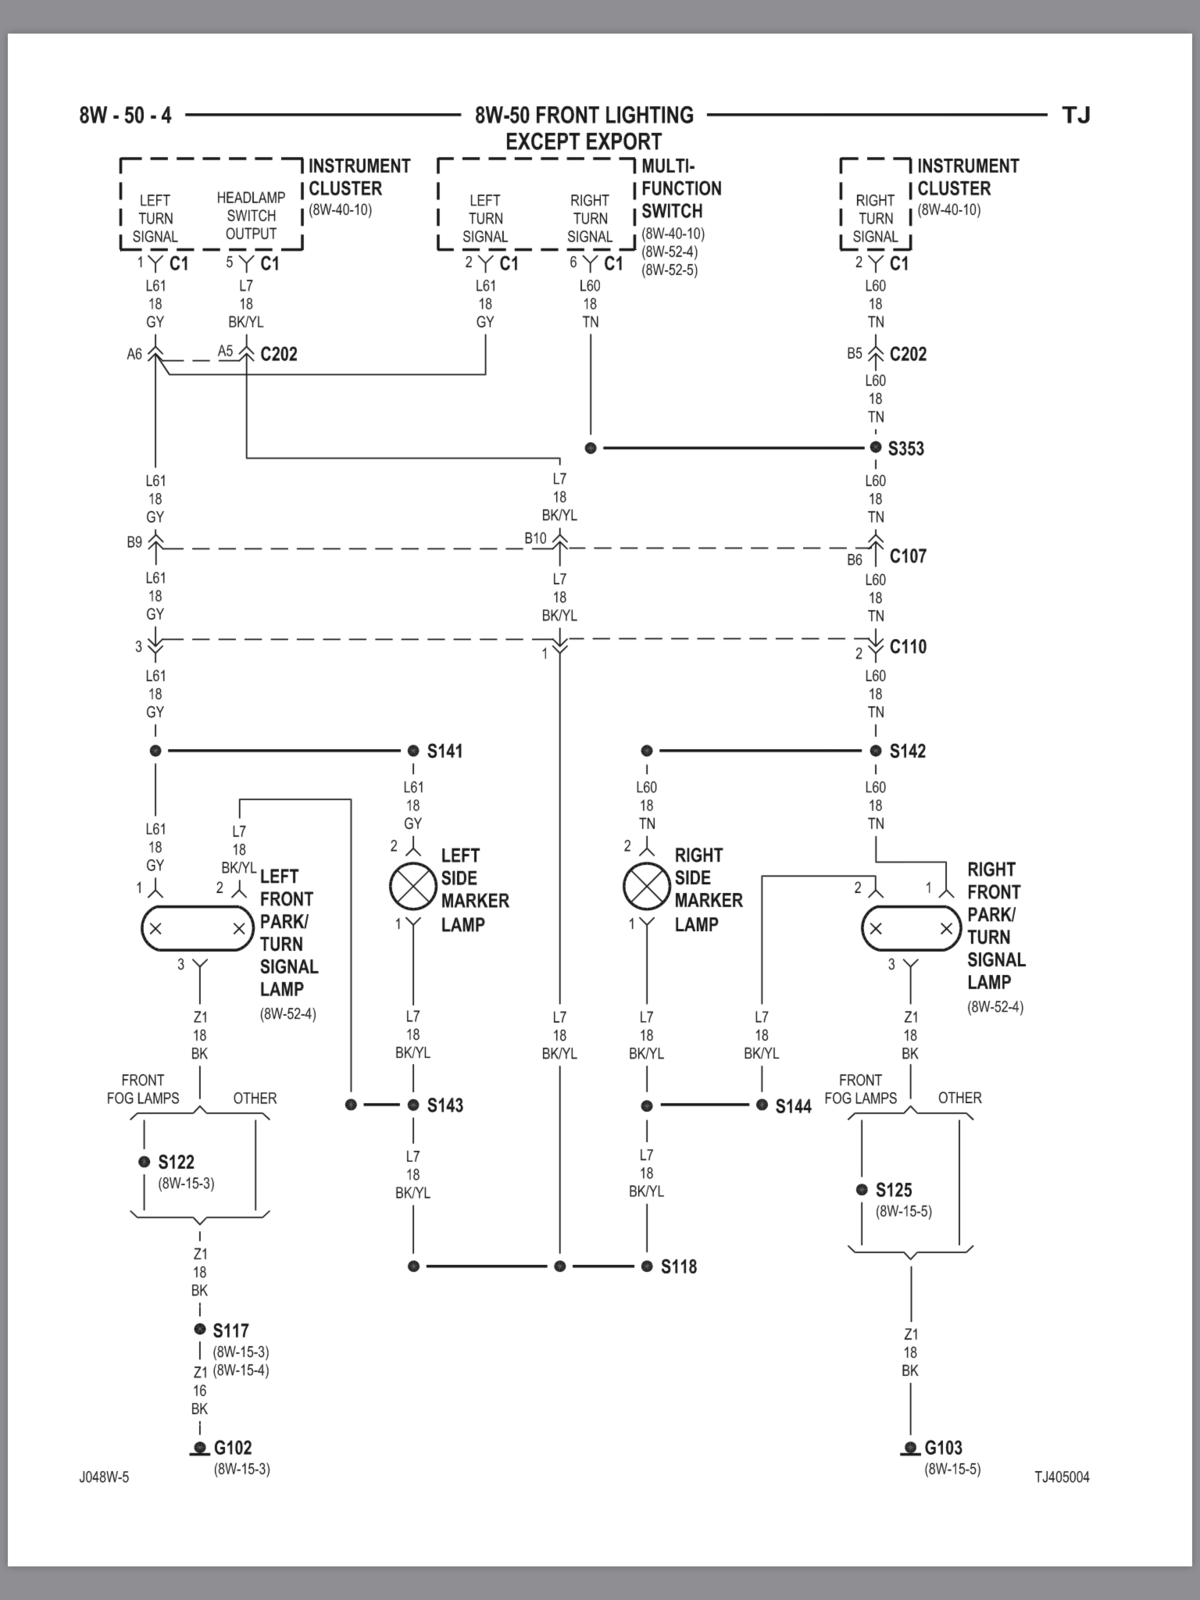 Wiring Guide or Diagram | Jeep Wrangler TJ Forum  2002 Jeep Wrangler Wiring Diagram    Jeep Wrangler TJ Forum